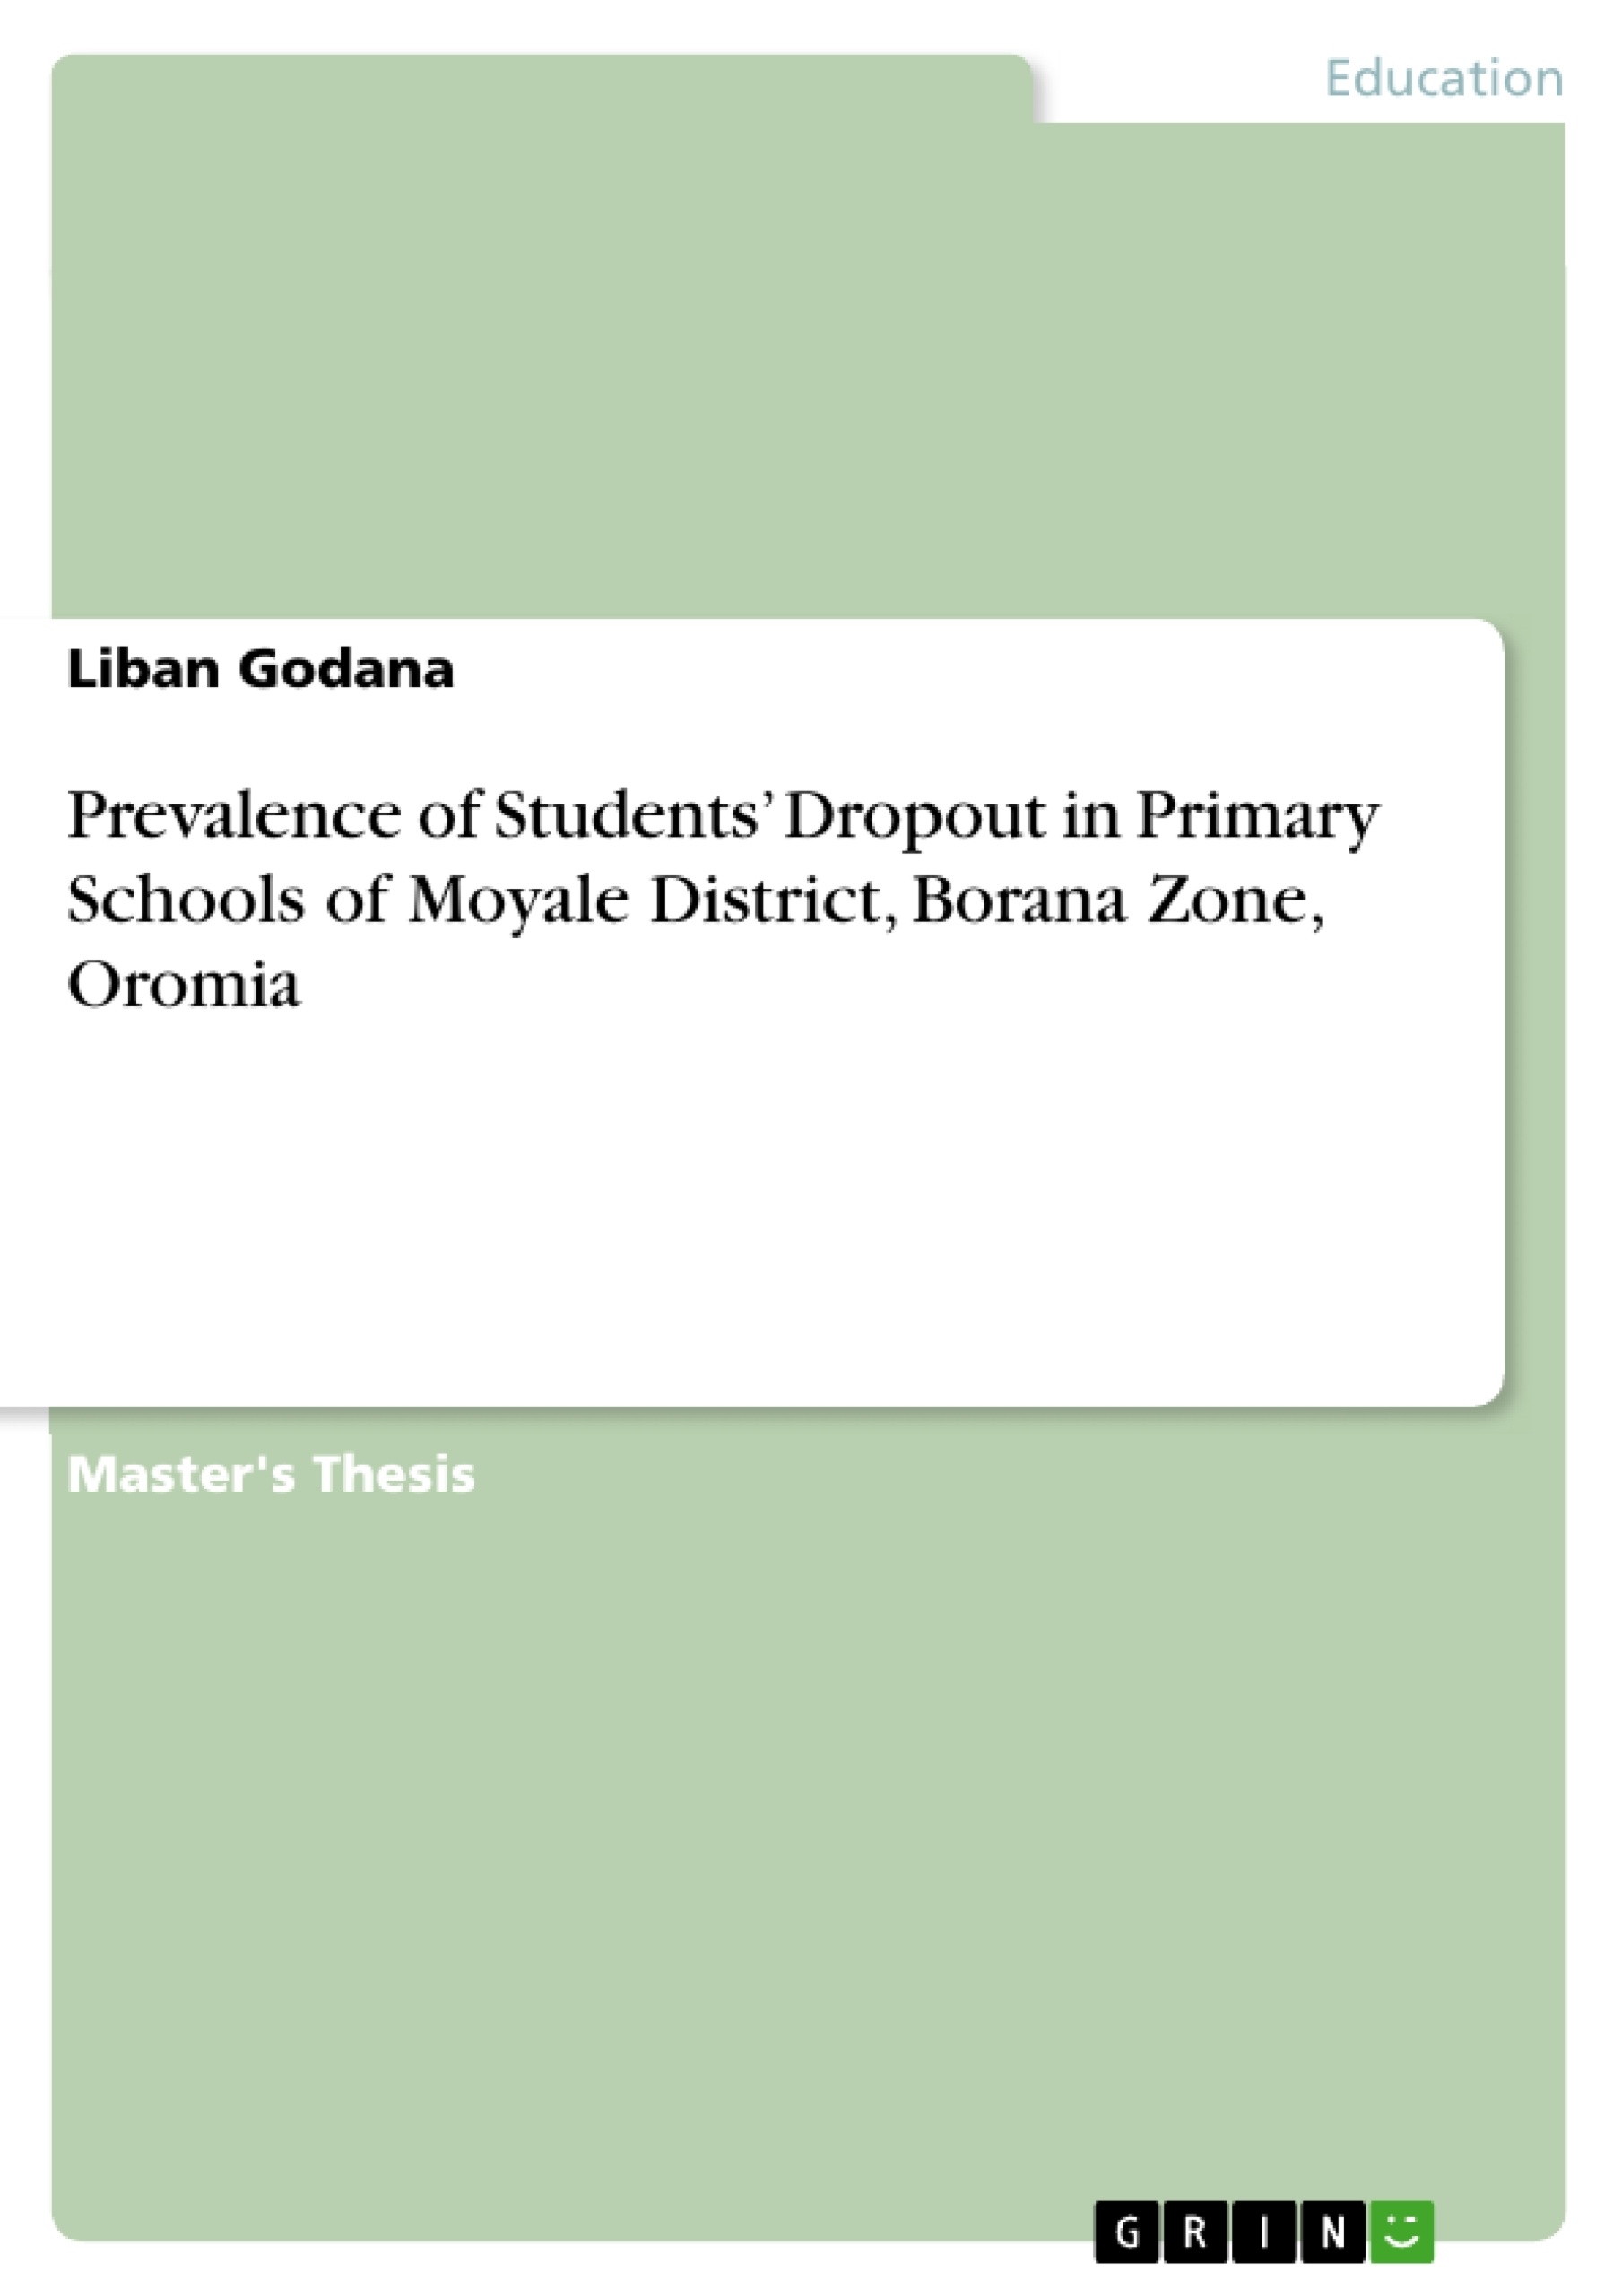 Title: Prevalence of Students’ Dropout in Primary Schools of Moyale District, Borana Zone, Oromia